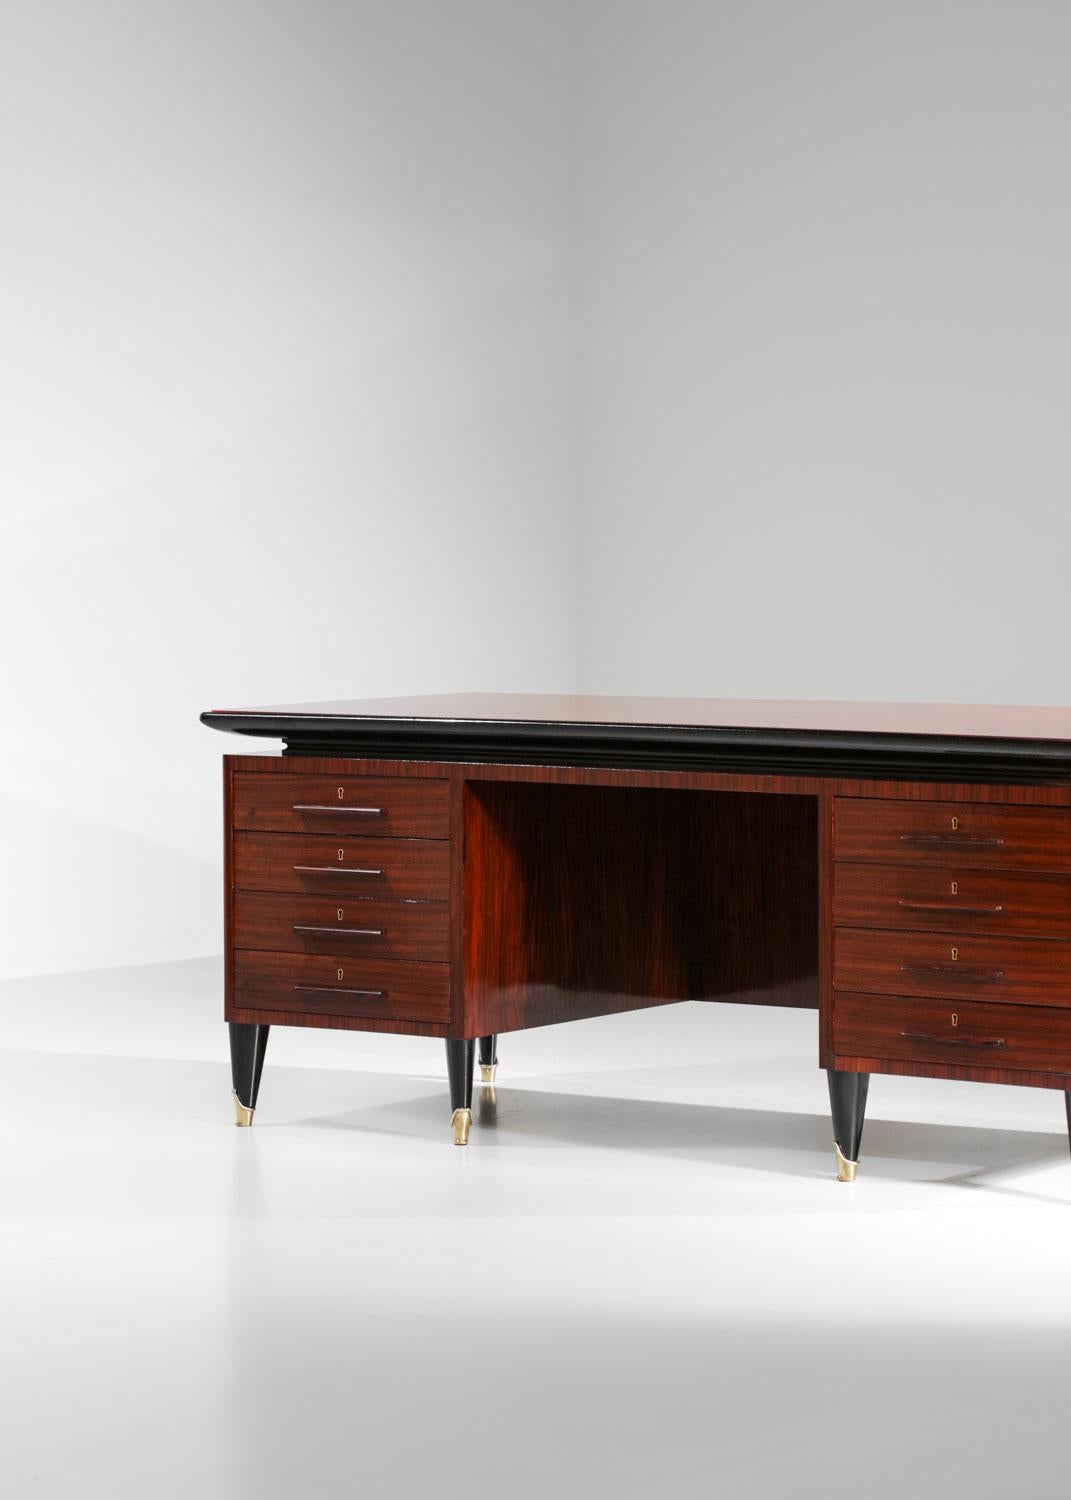 Italian large Desk by Vittorio Dassi solid wood and glass 60s - G725 For Sale 11